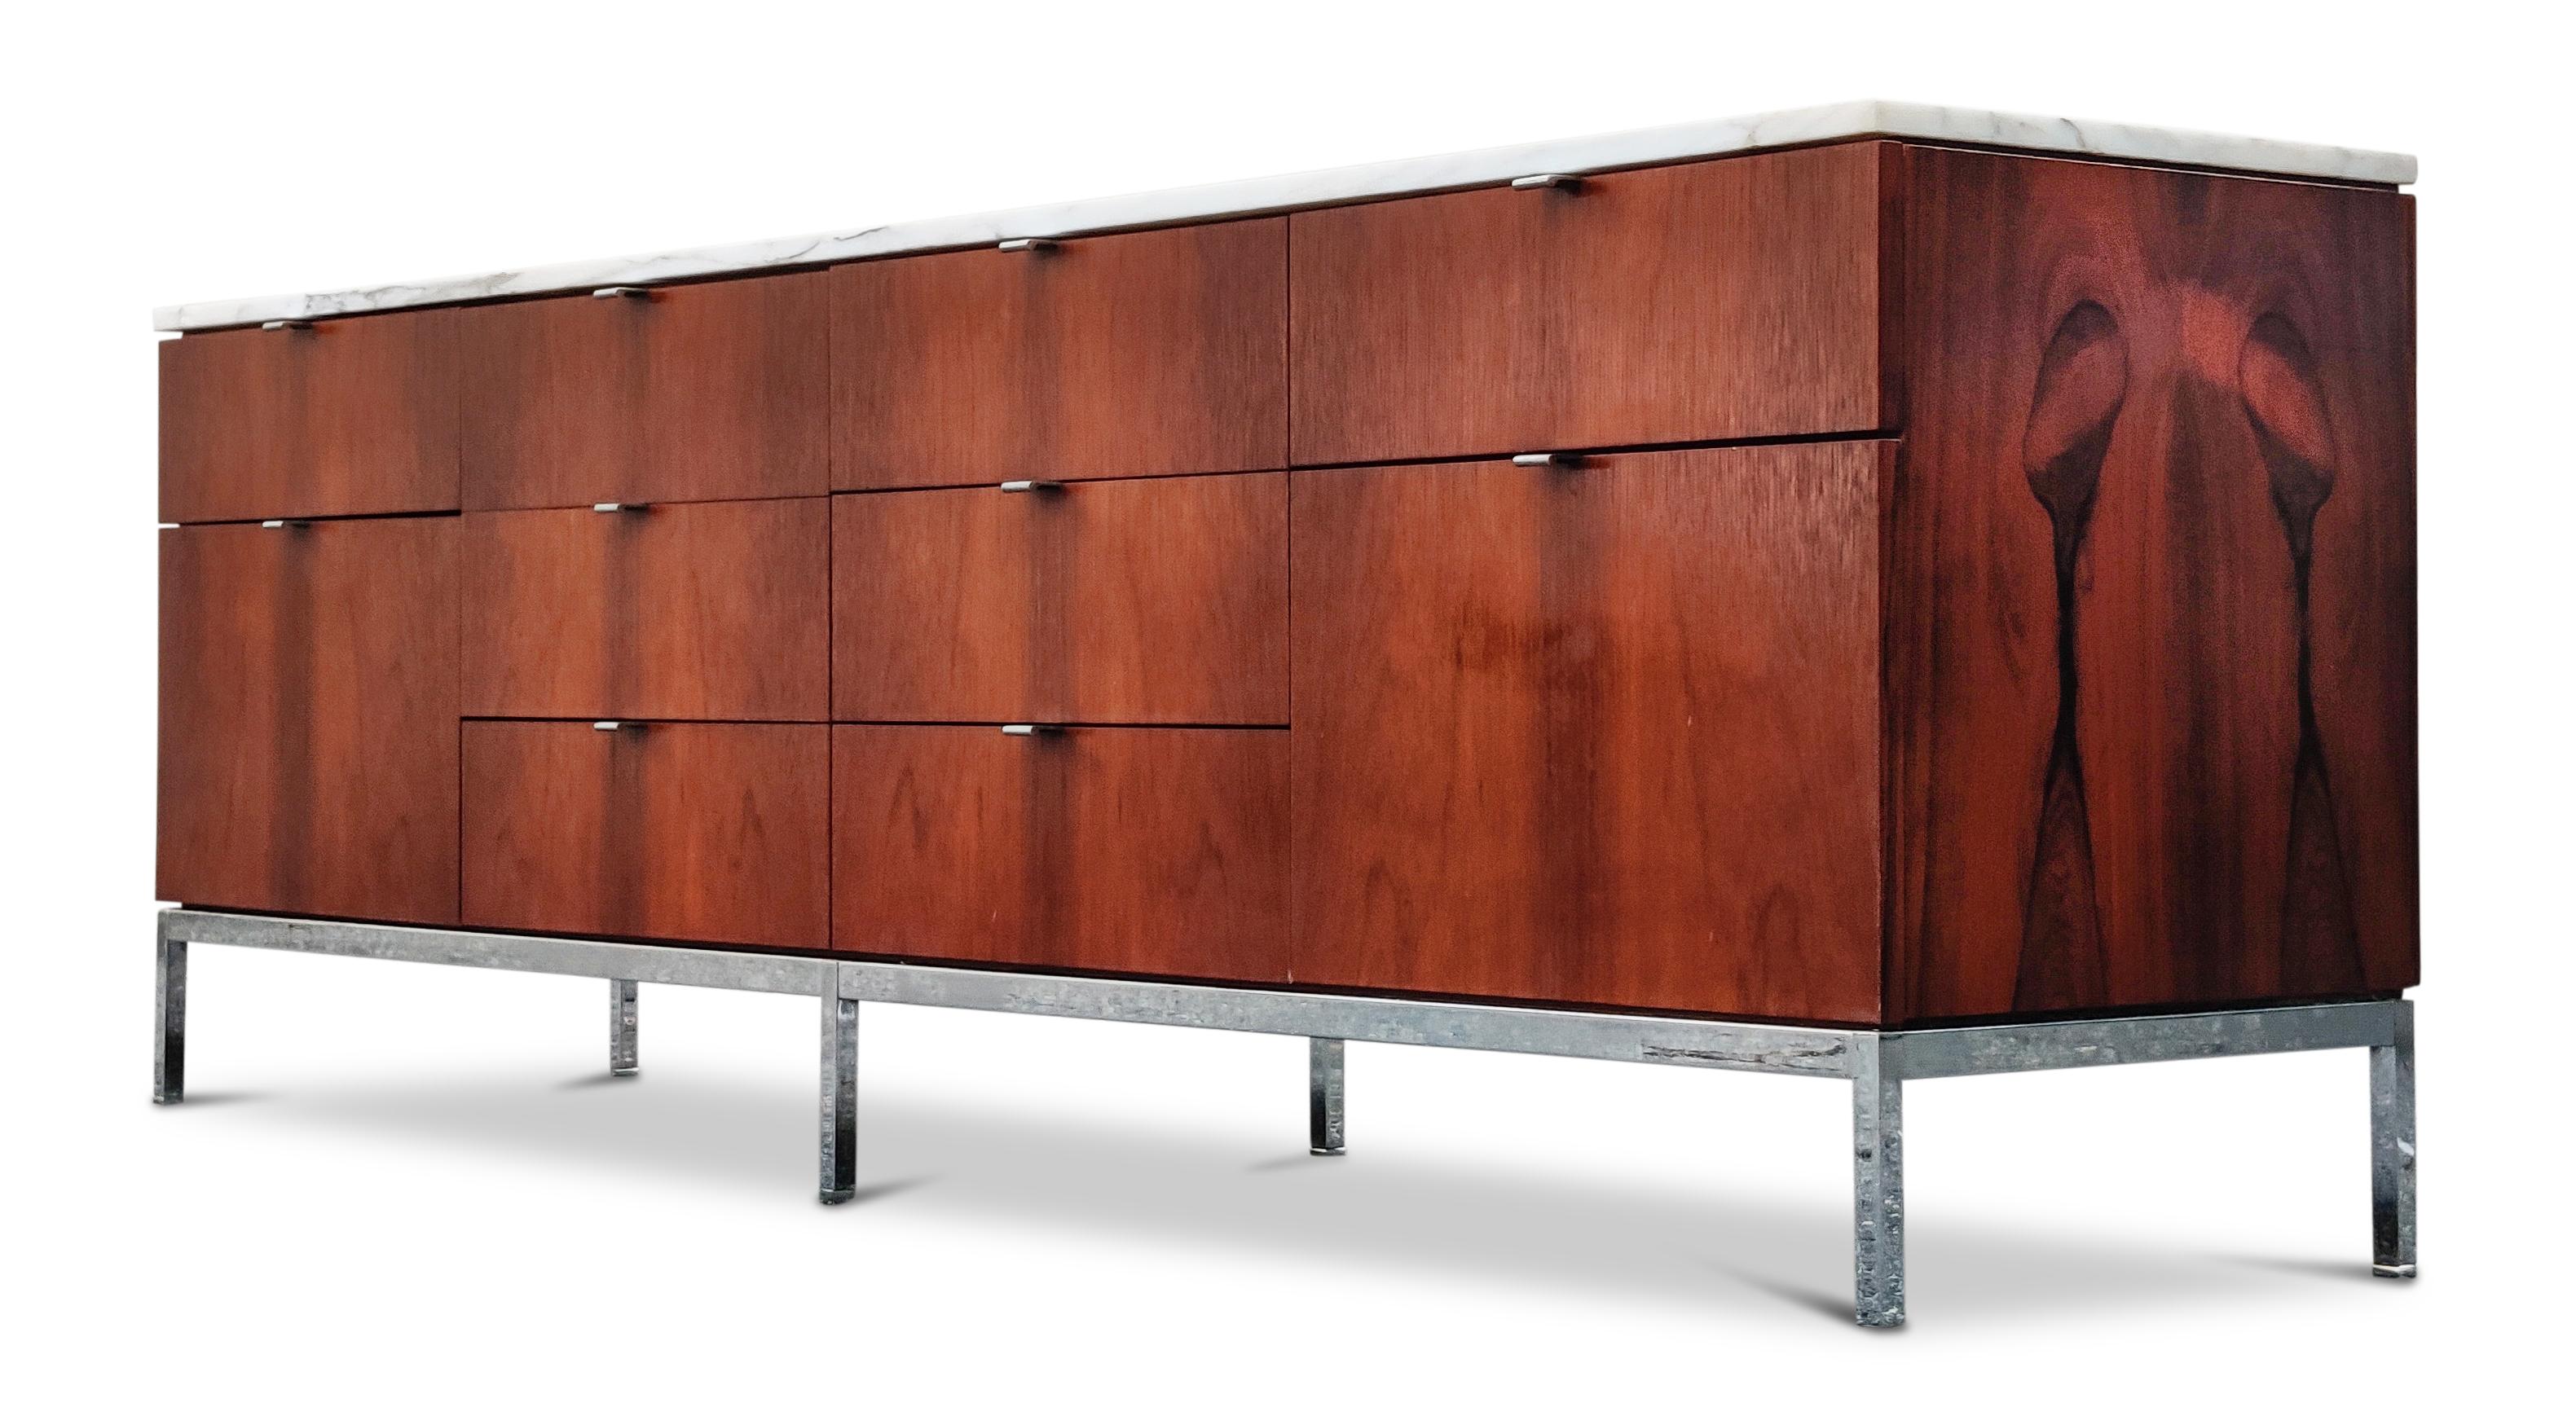 Vintage, made in 1972, rosewood credenza with original white Calacatta gold marble top on chromed steel legs with chromed pulls. Recently wax-burnished by hand, the rosewood color and pattern are very expressive and warm. No key for original lock.